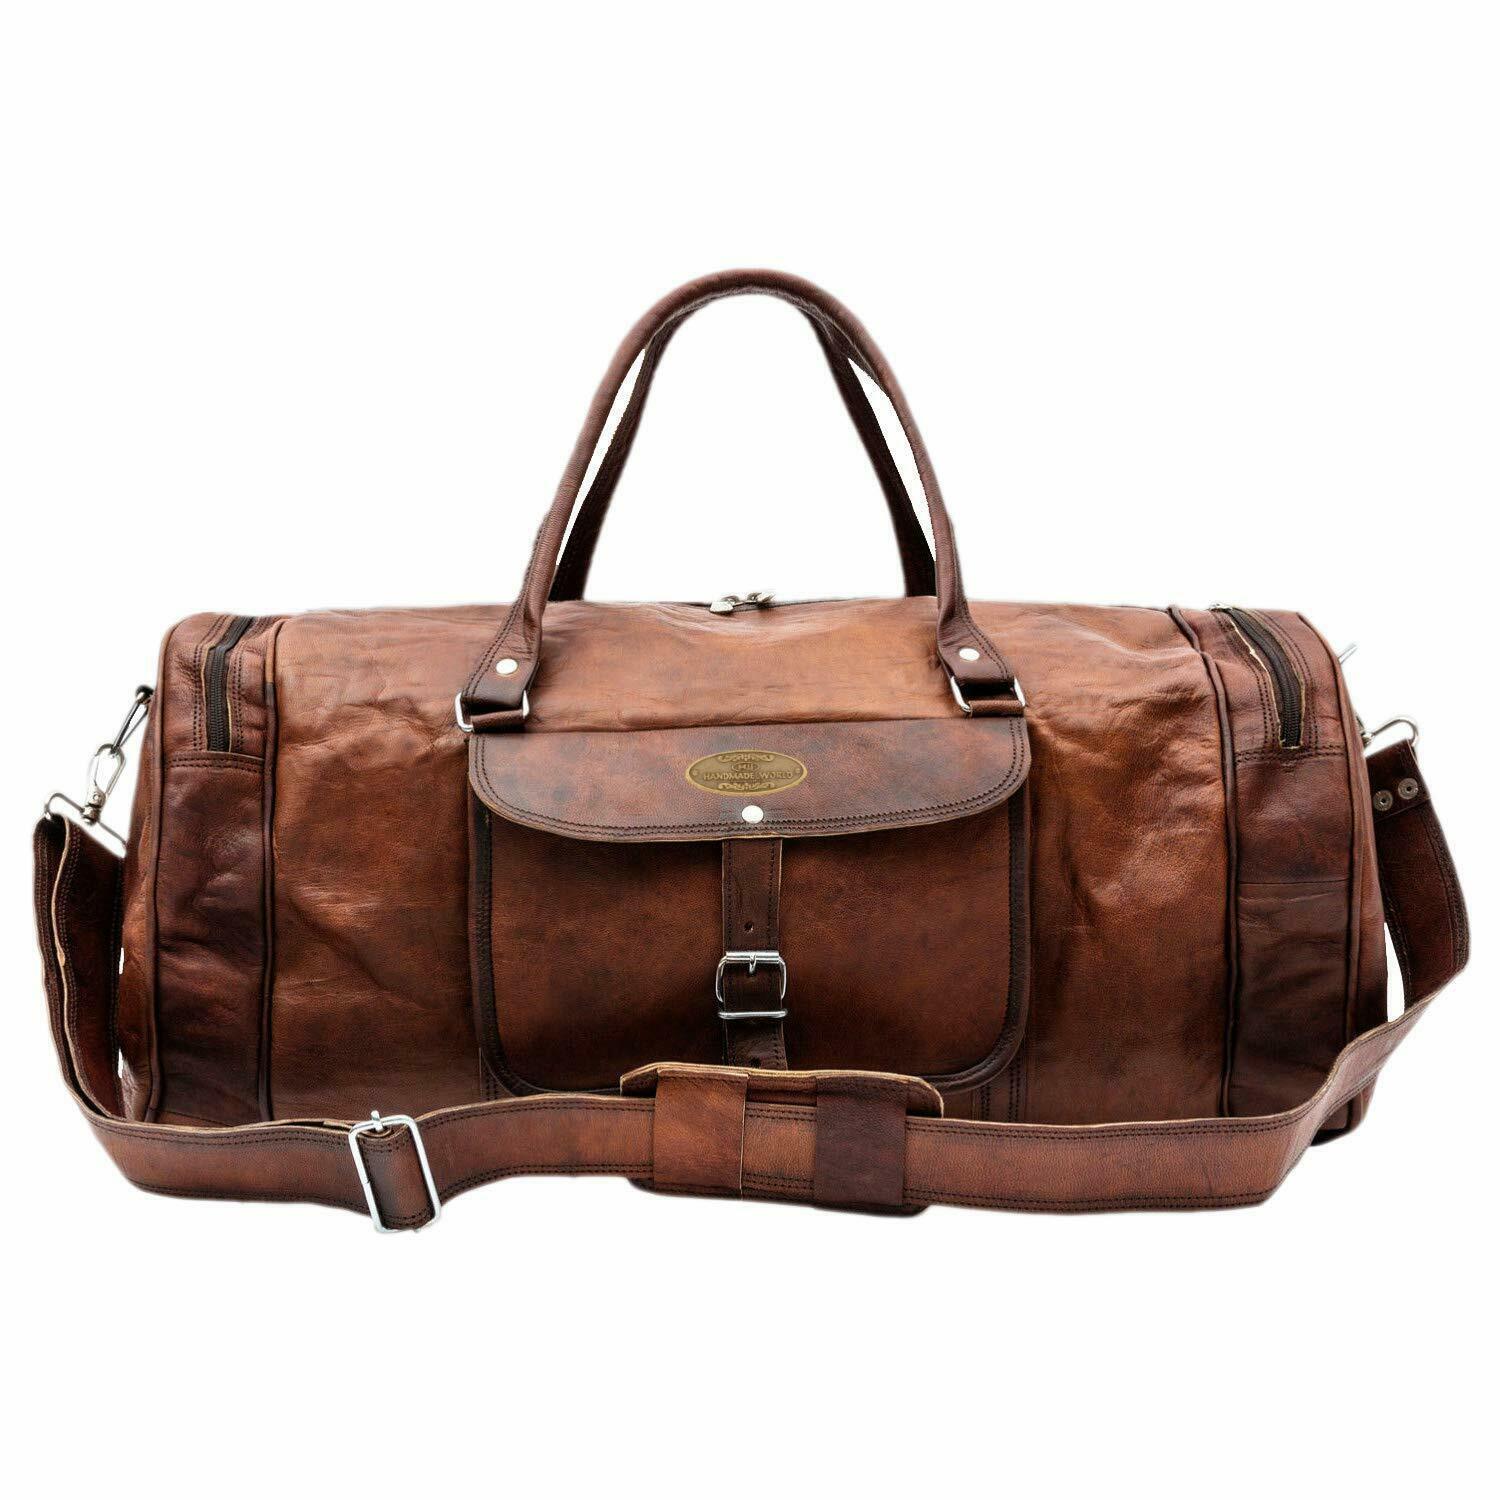 Men's Vintage Strong Genuine Leather Duffle Gym Overnight Travel Bag ...